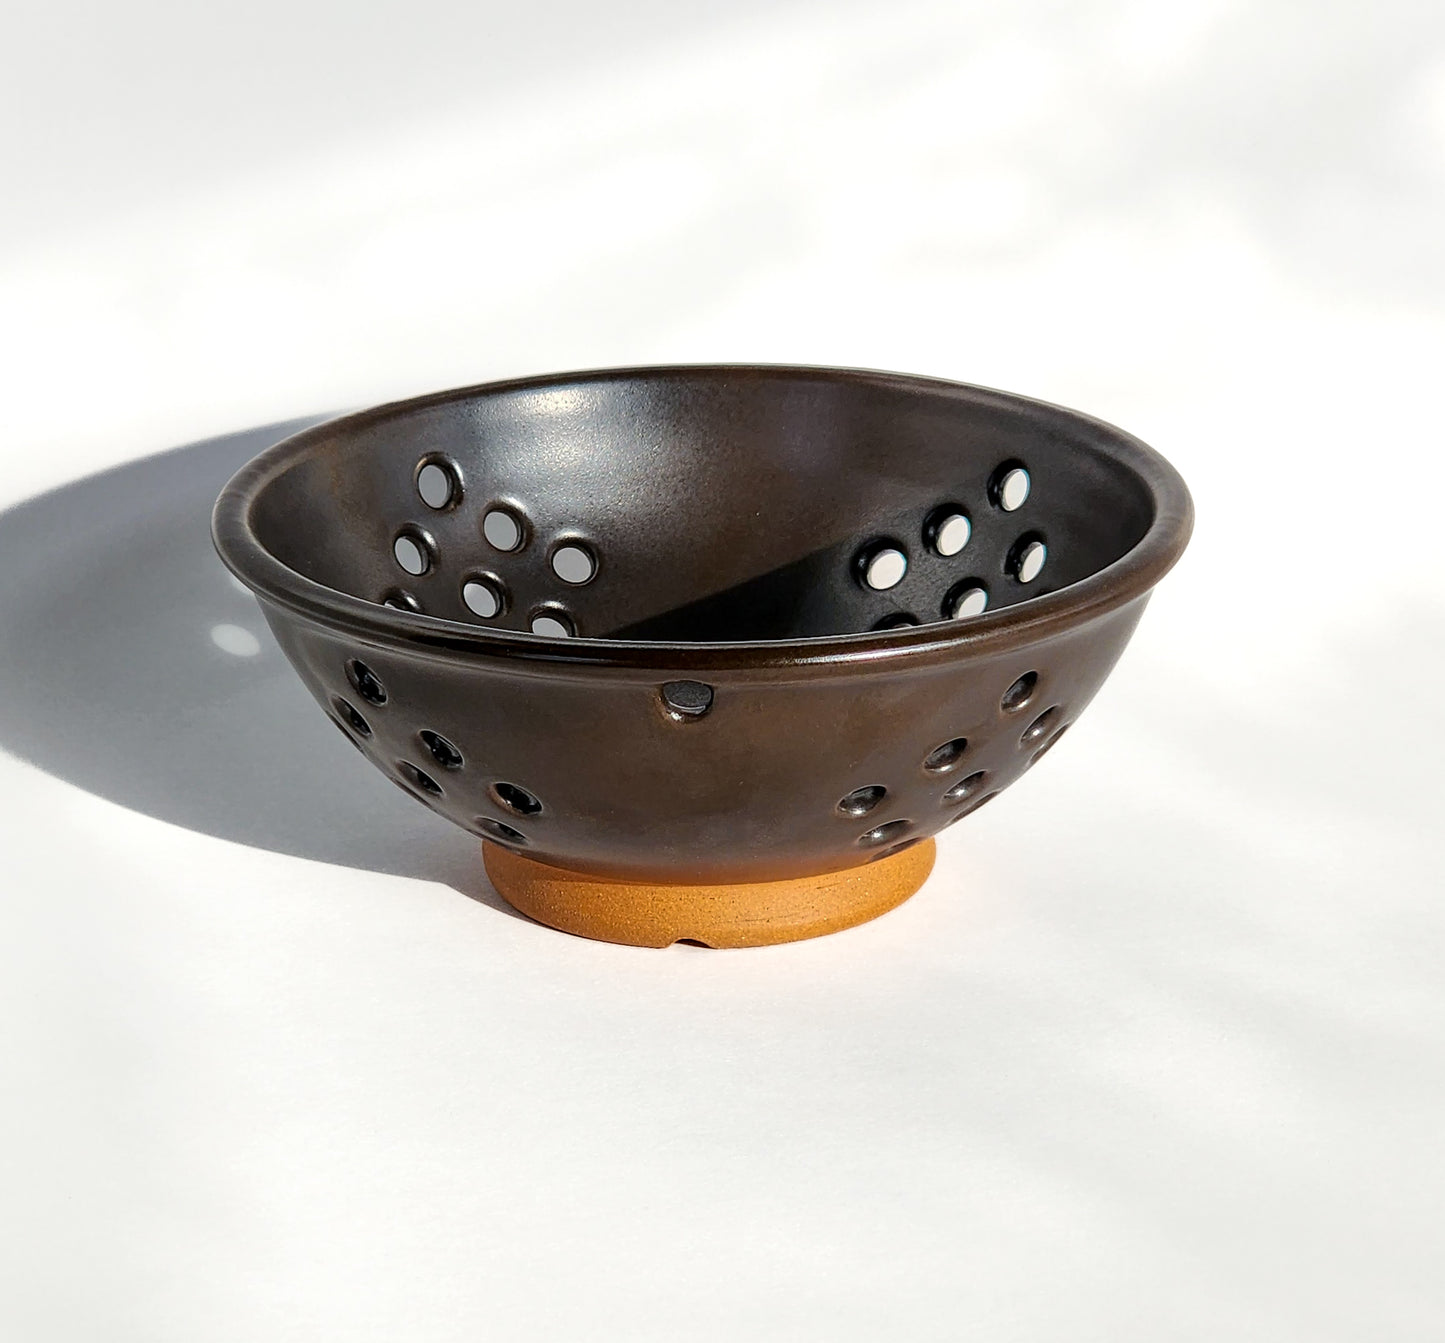  Image: Clinton Pottery's Handmade Small Colander in Licorice – A sleek and practical 2.25 cup colander, expertly crafted. This Licorice Black piece adds a touch of modern sophistication to your kitchen, reminiscent of refined simplicity and timeless style. Ideal for washing berries and smaller items, it seamlessly combines style with functionality.